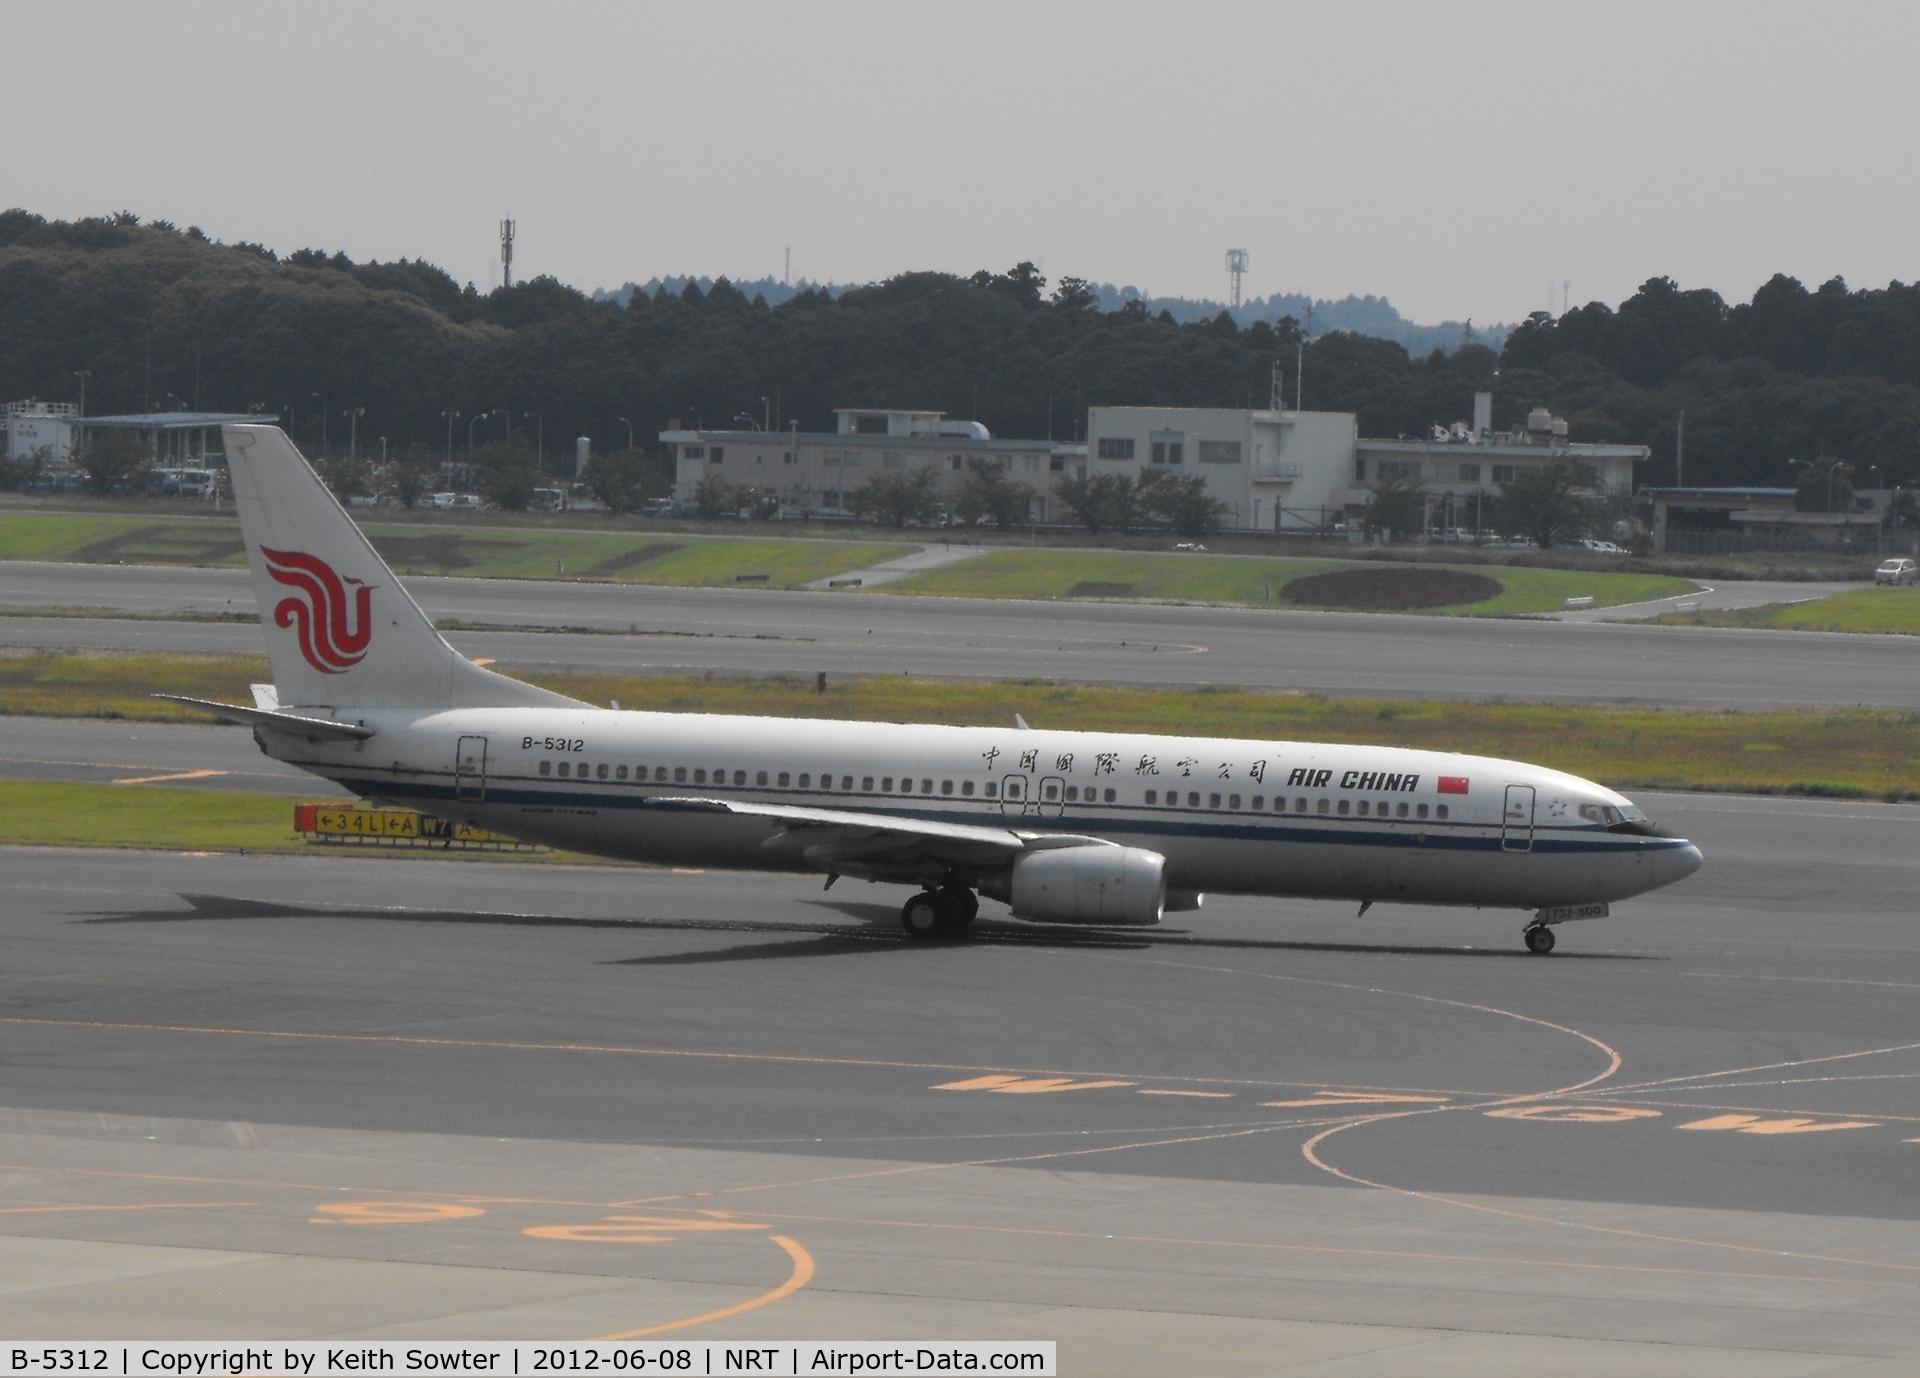 B-5312, 2007 Boeing 737-8Q8 C/N 29374, Taxying for departure